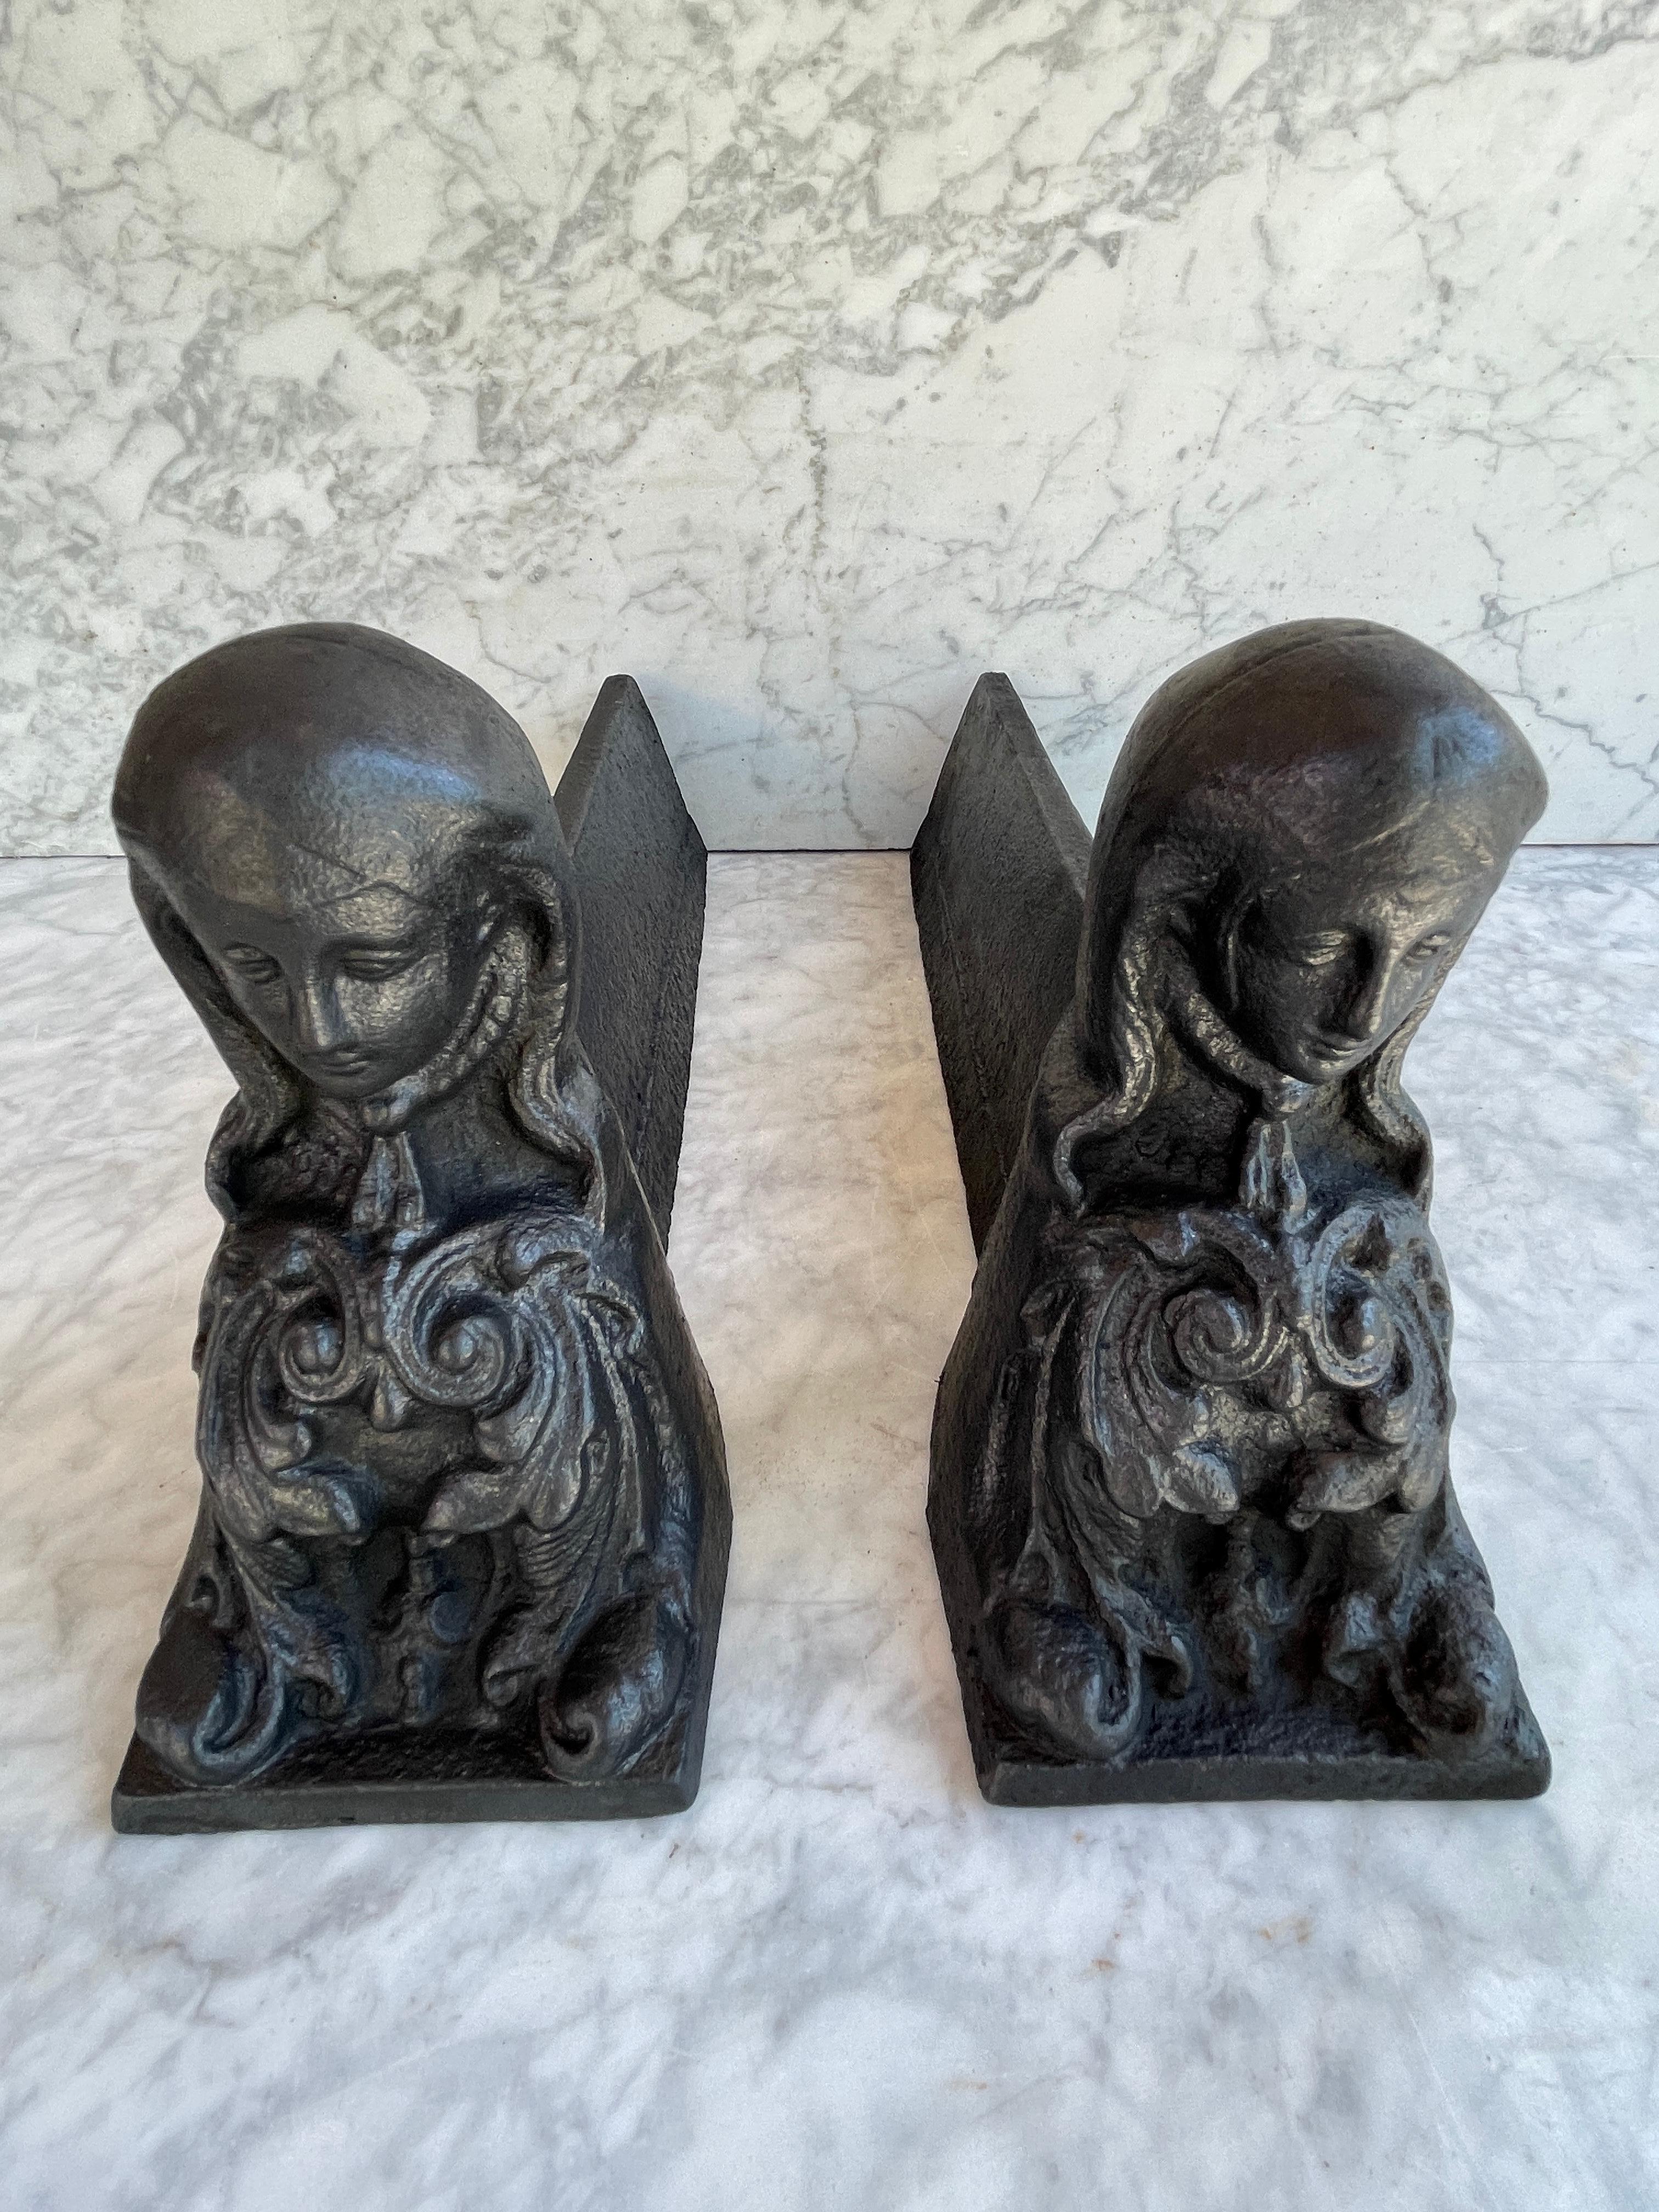 French Napoleon III 'Woman' andirons / firedogs, 19th century.
This pair is in really nice condition.